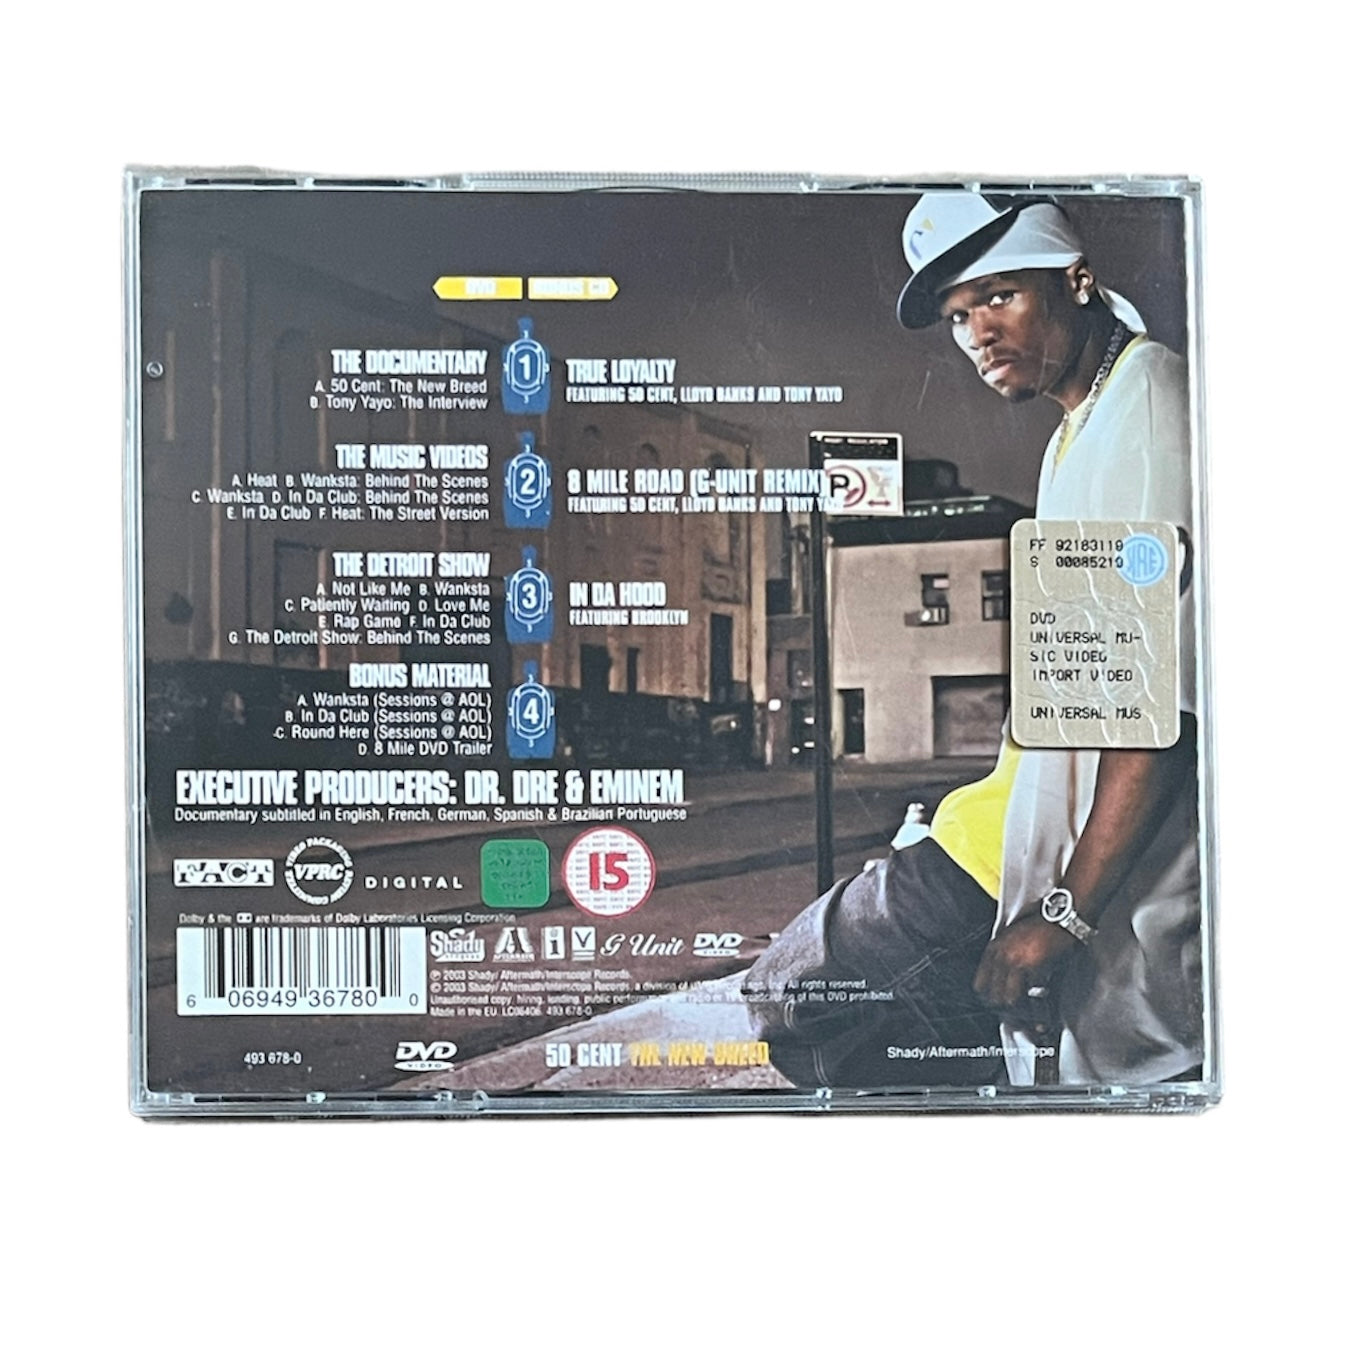 50 CENT - THE NEW BREED - 2003 (CD+DVD)